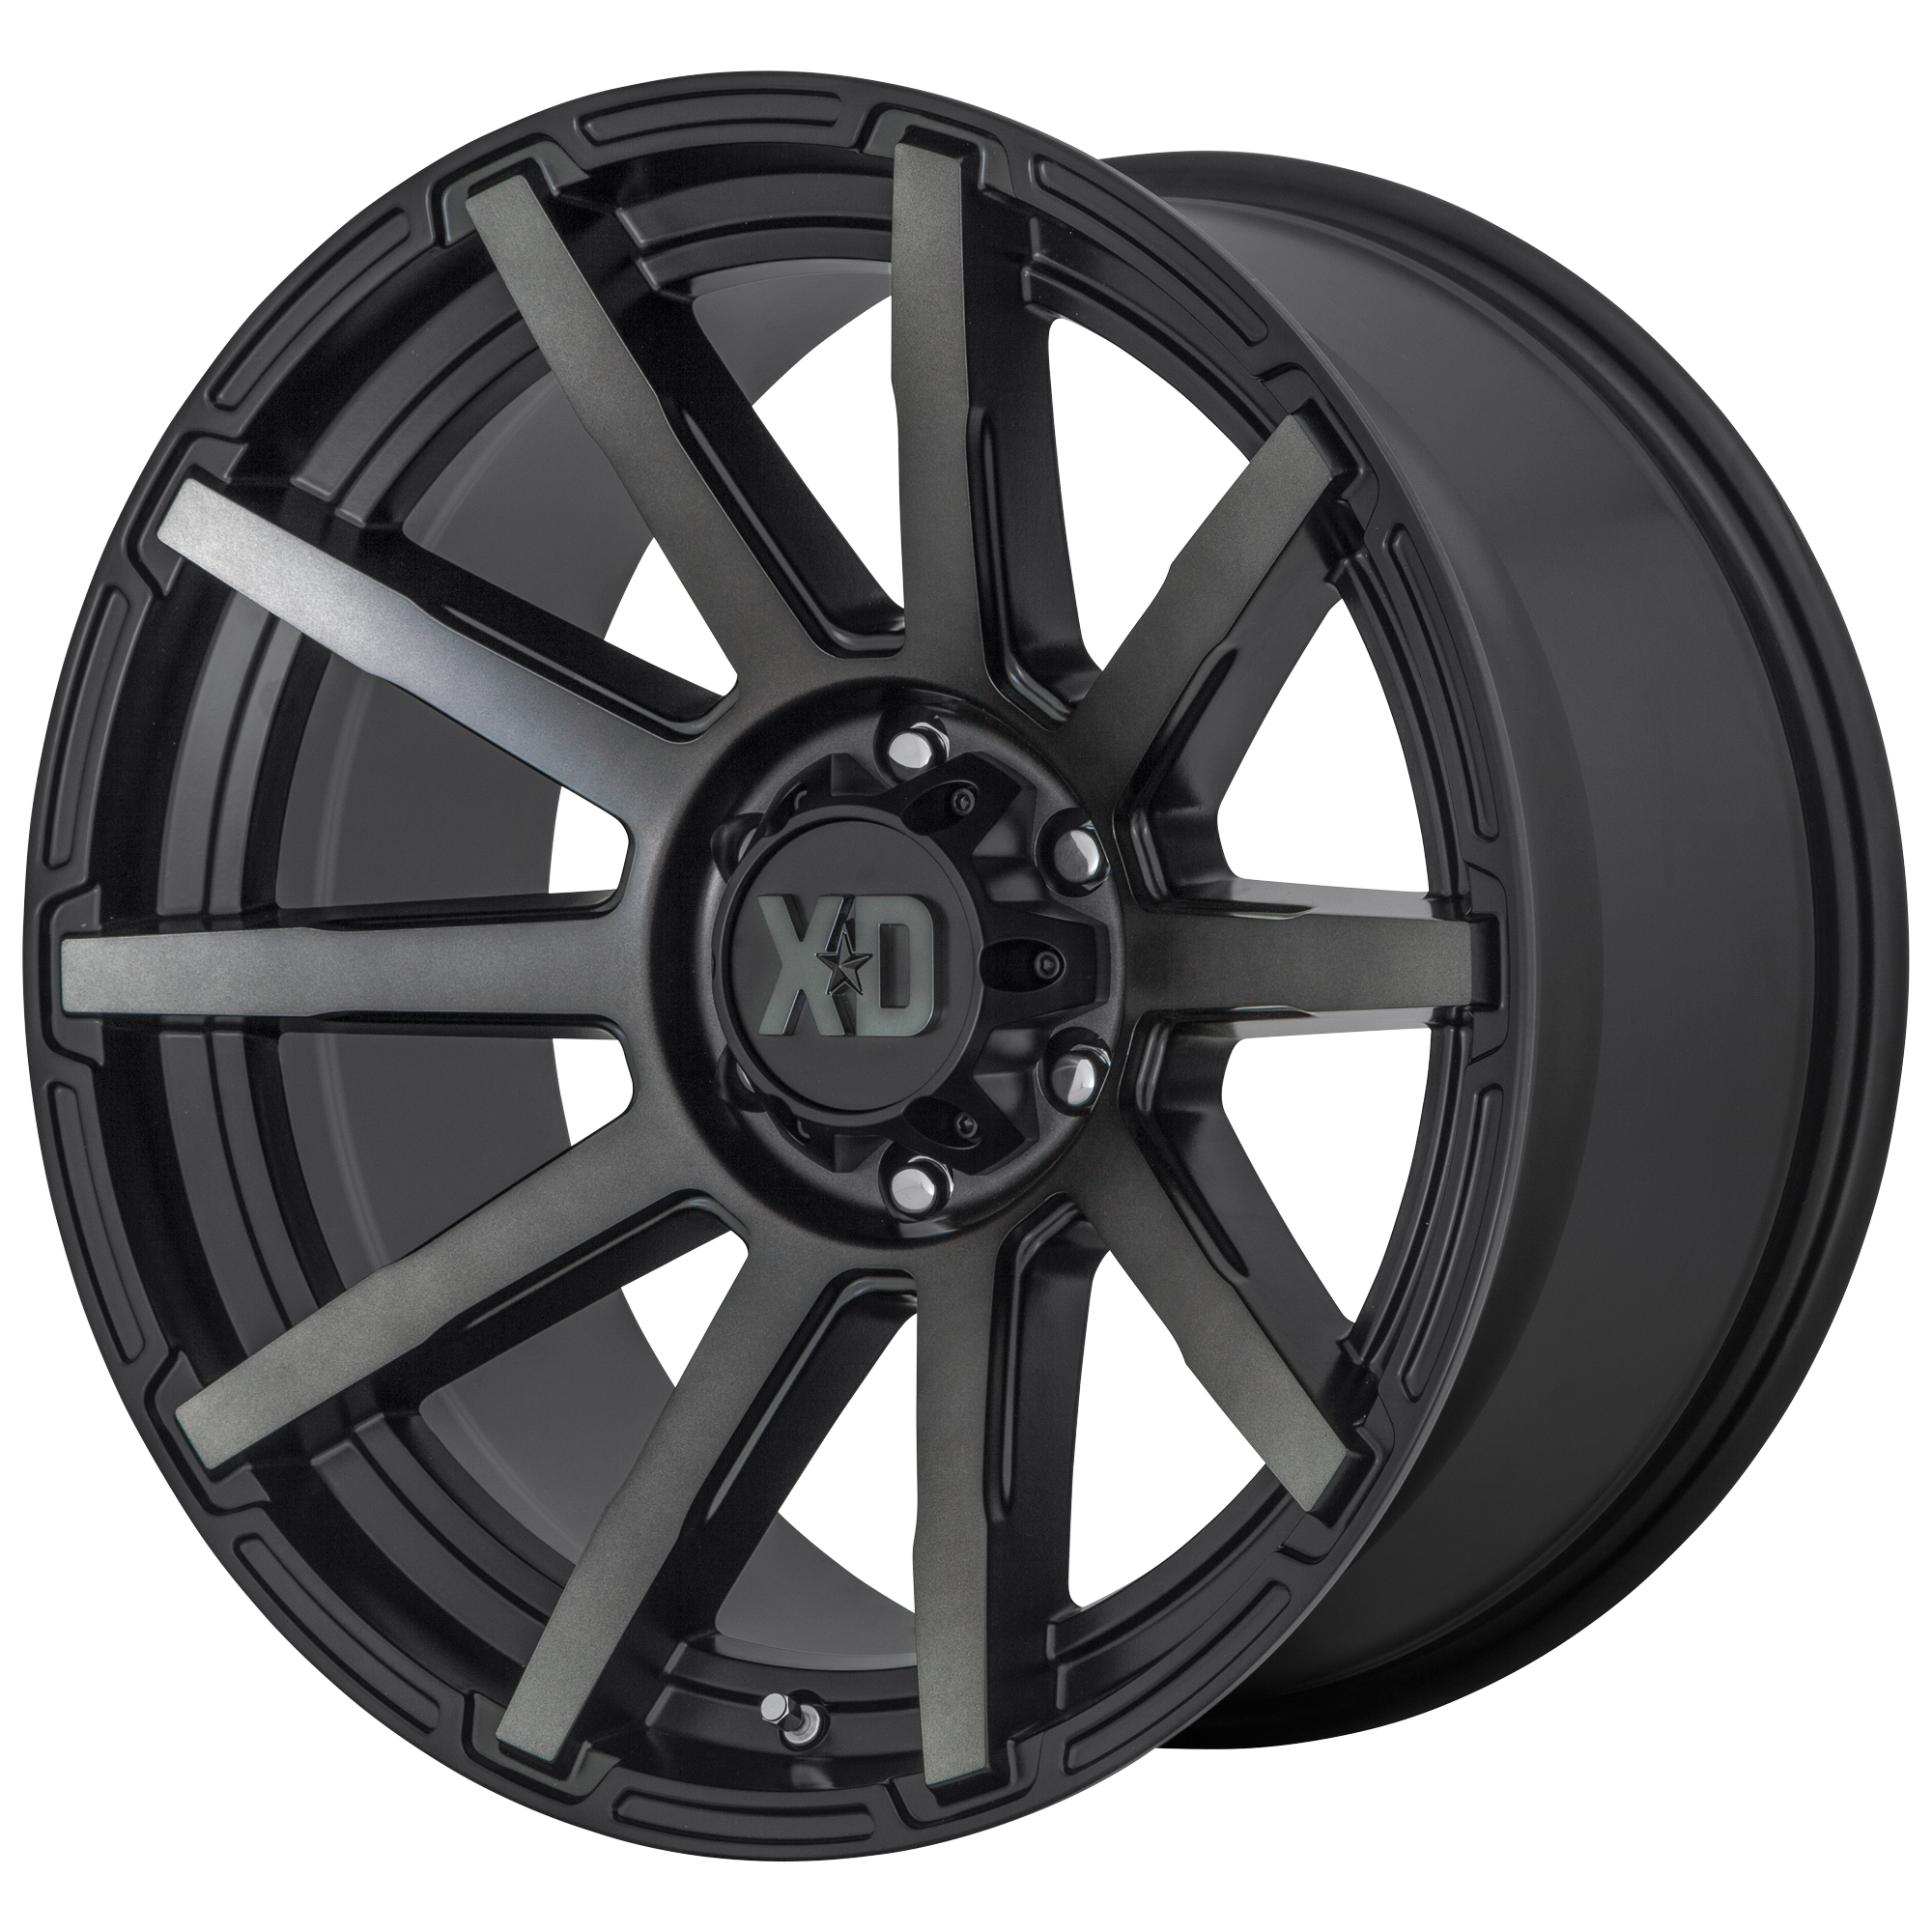 OUTBREAK 18x9 6x135.00 SATIN BLACK W/ GRAY TINT (12 mm) - Tires and Engine Performance